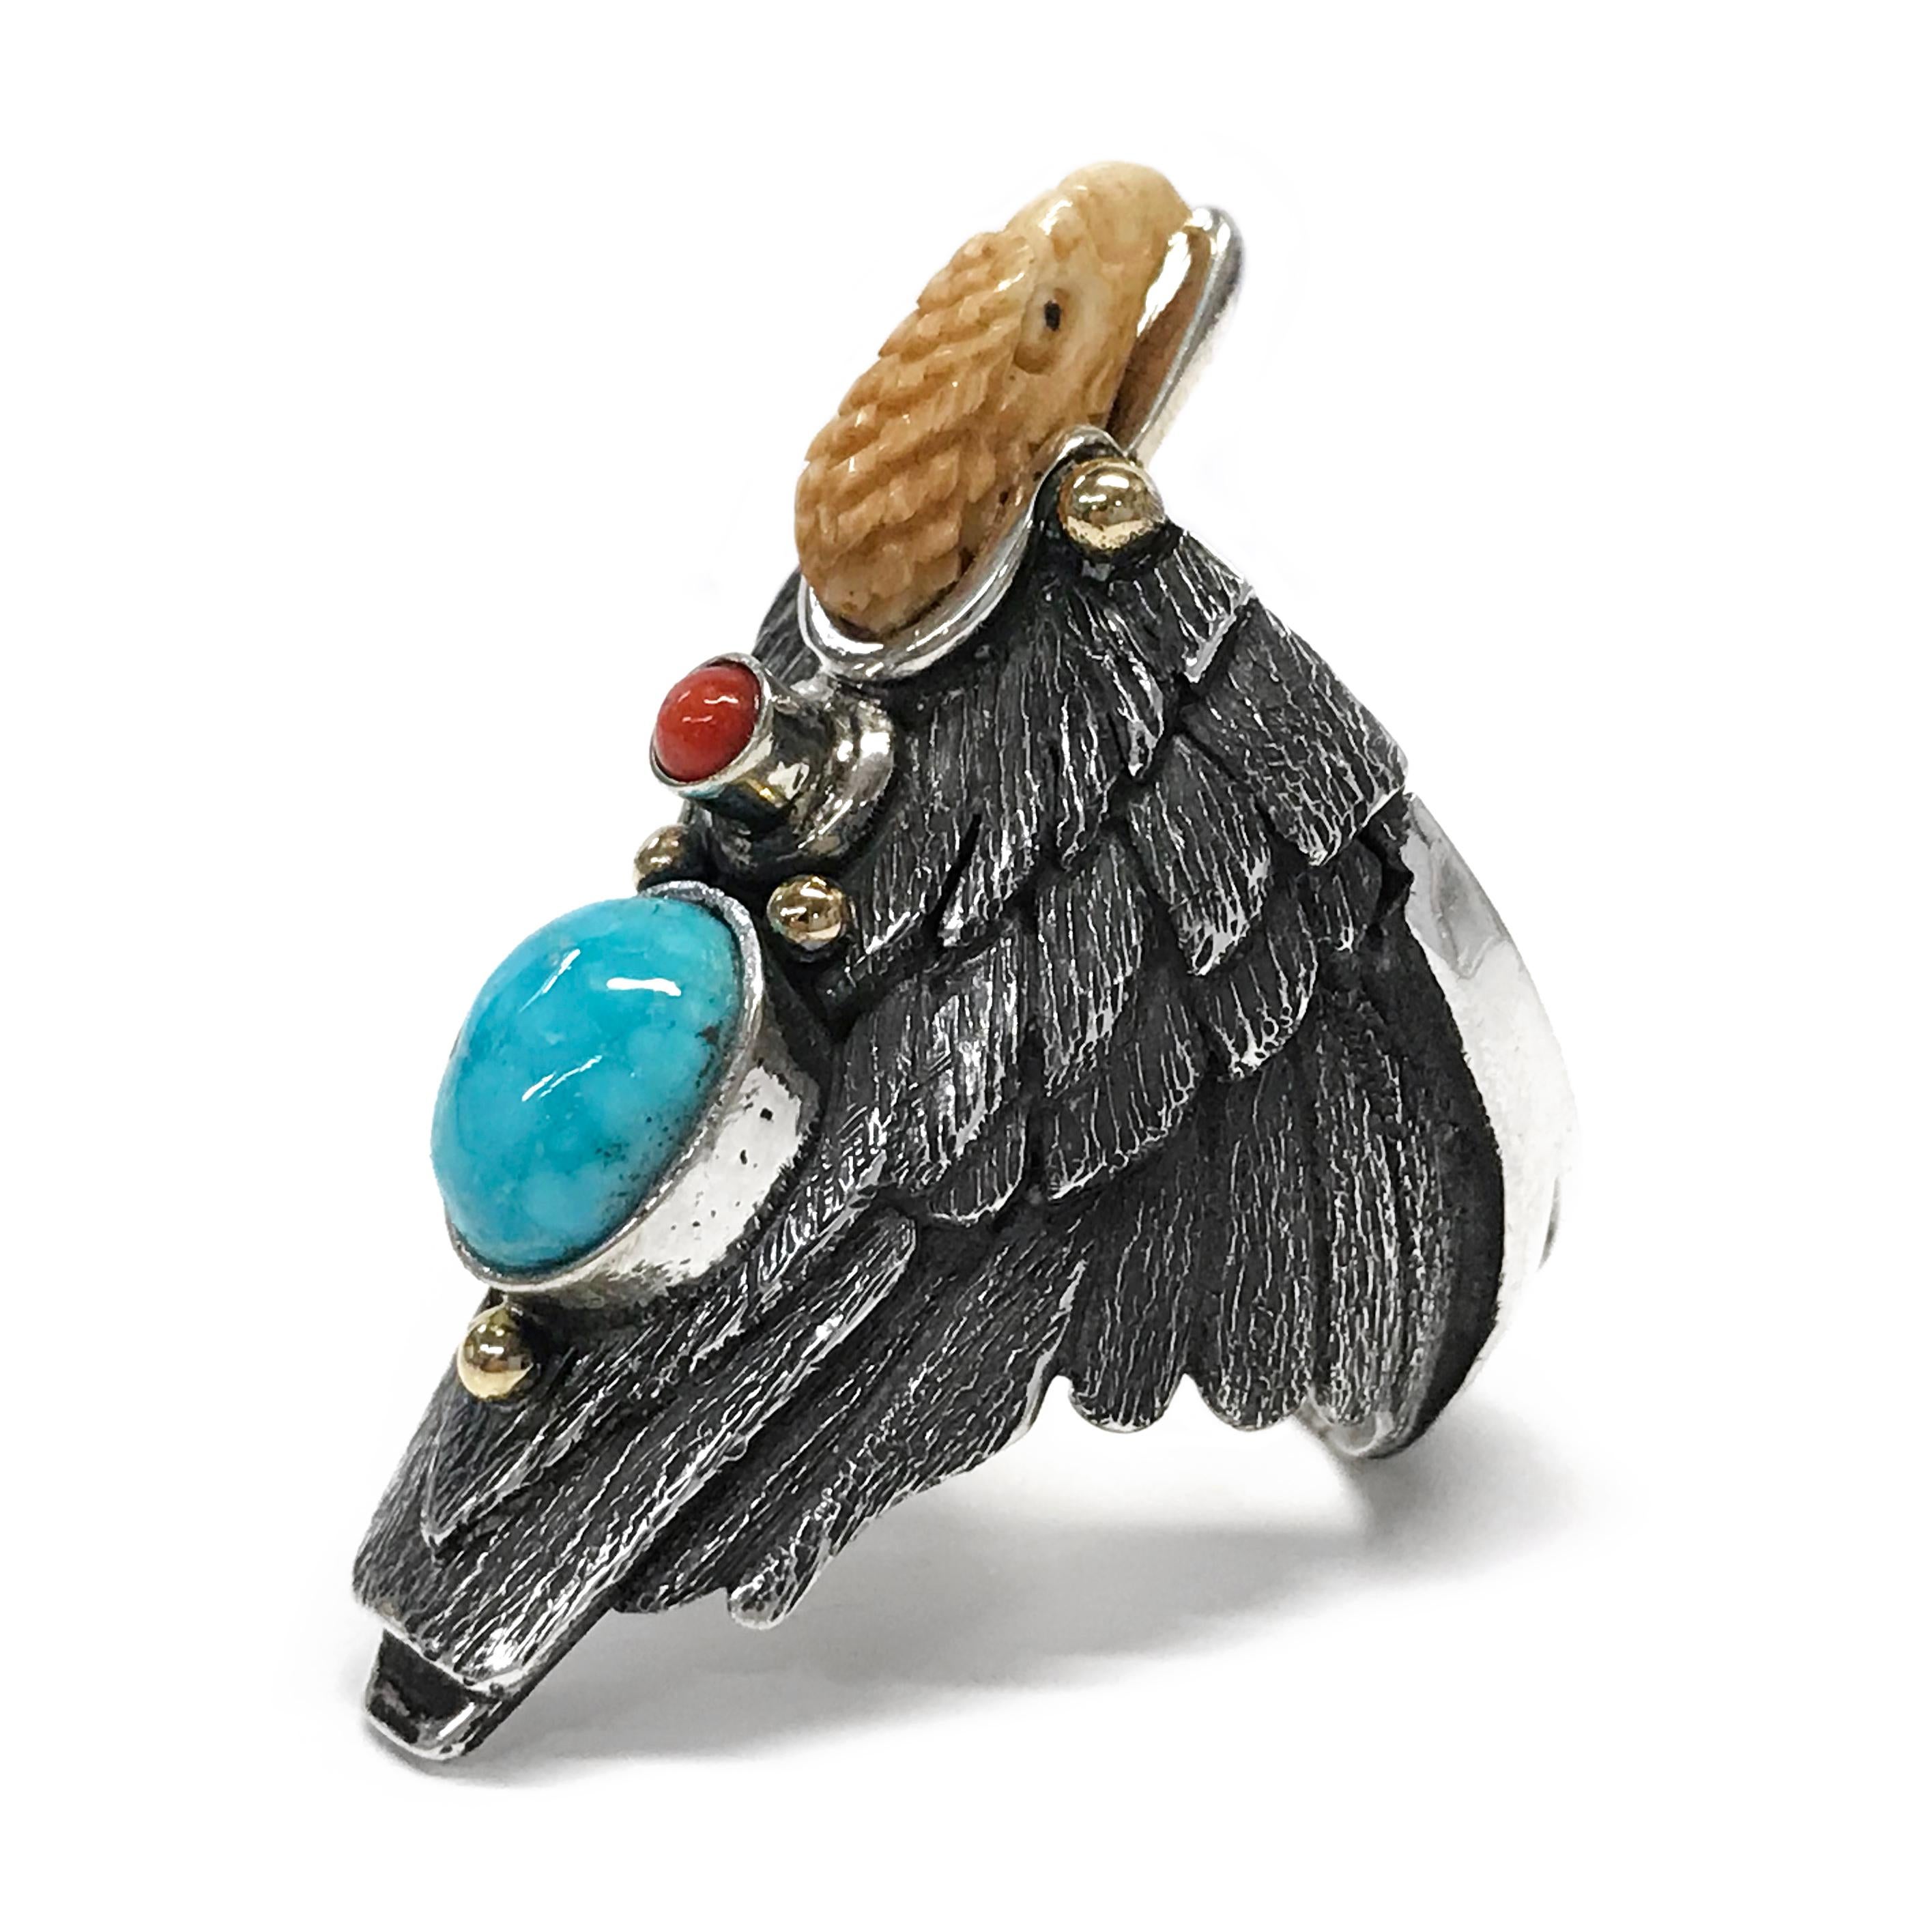 Handcrafted from Sterling Silver with 14k accents by jewelry maker, Ray Winner. This absolutely glorious ring features a natural Blue Carico Lake Turquoise oval cabochon and Mediterranean Coral round cabochon bezel set. The form of the ring band is